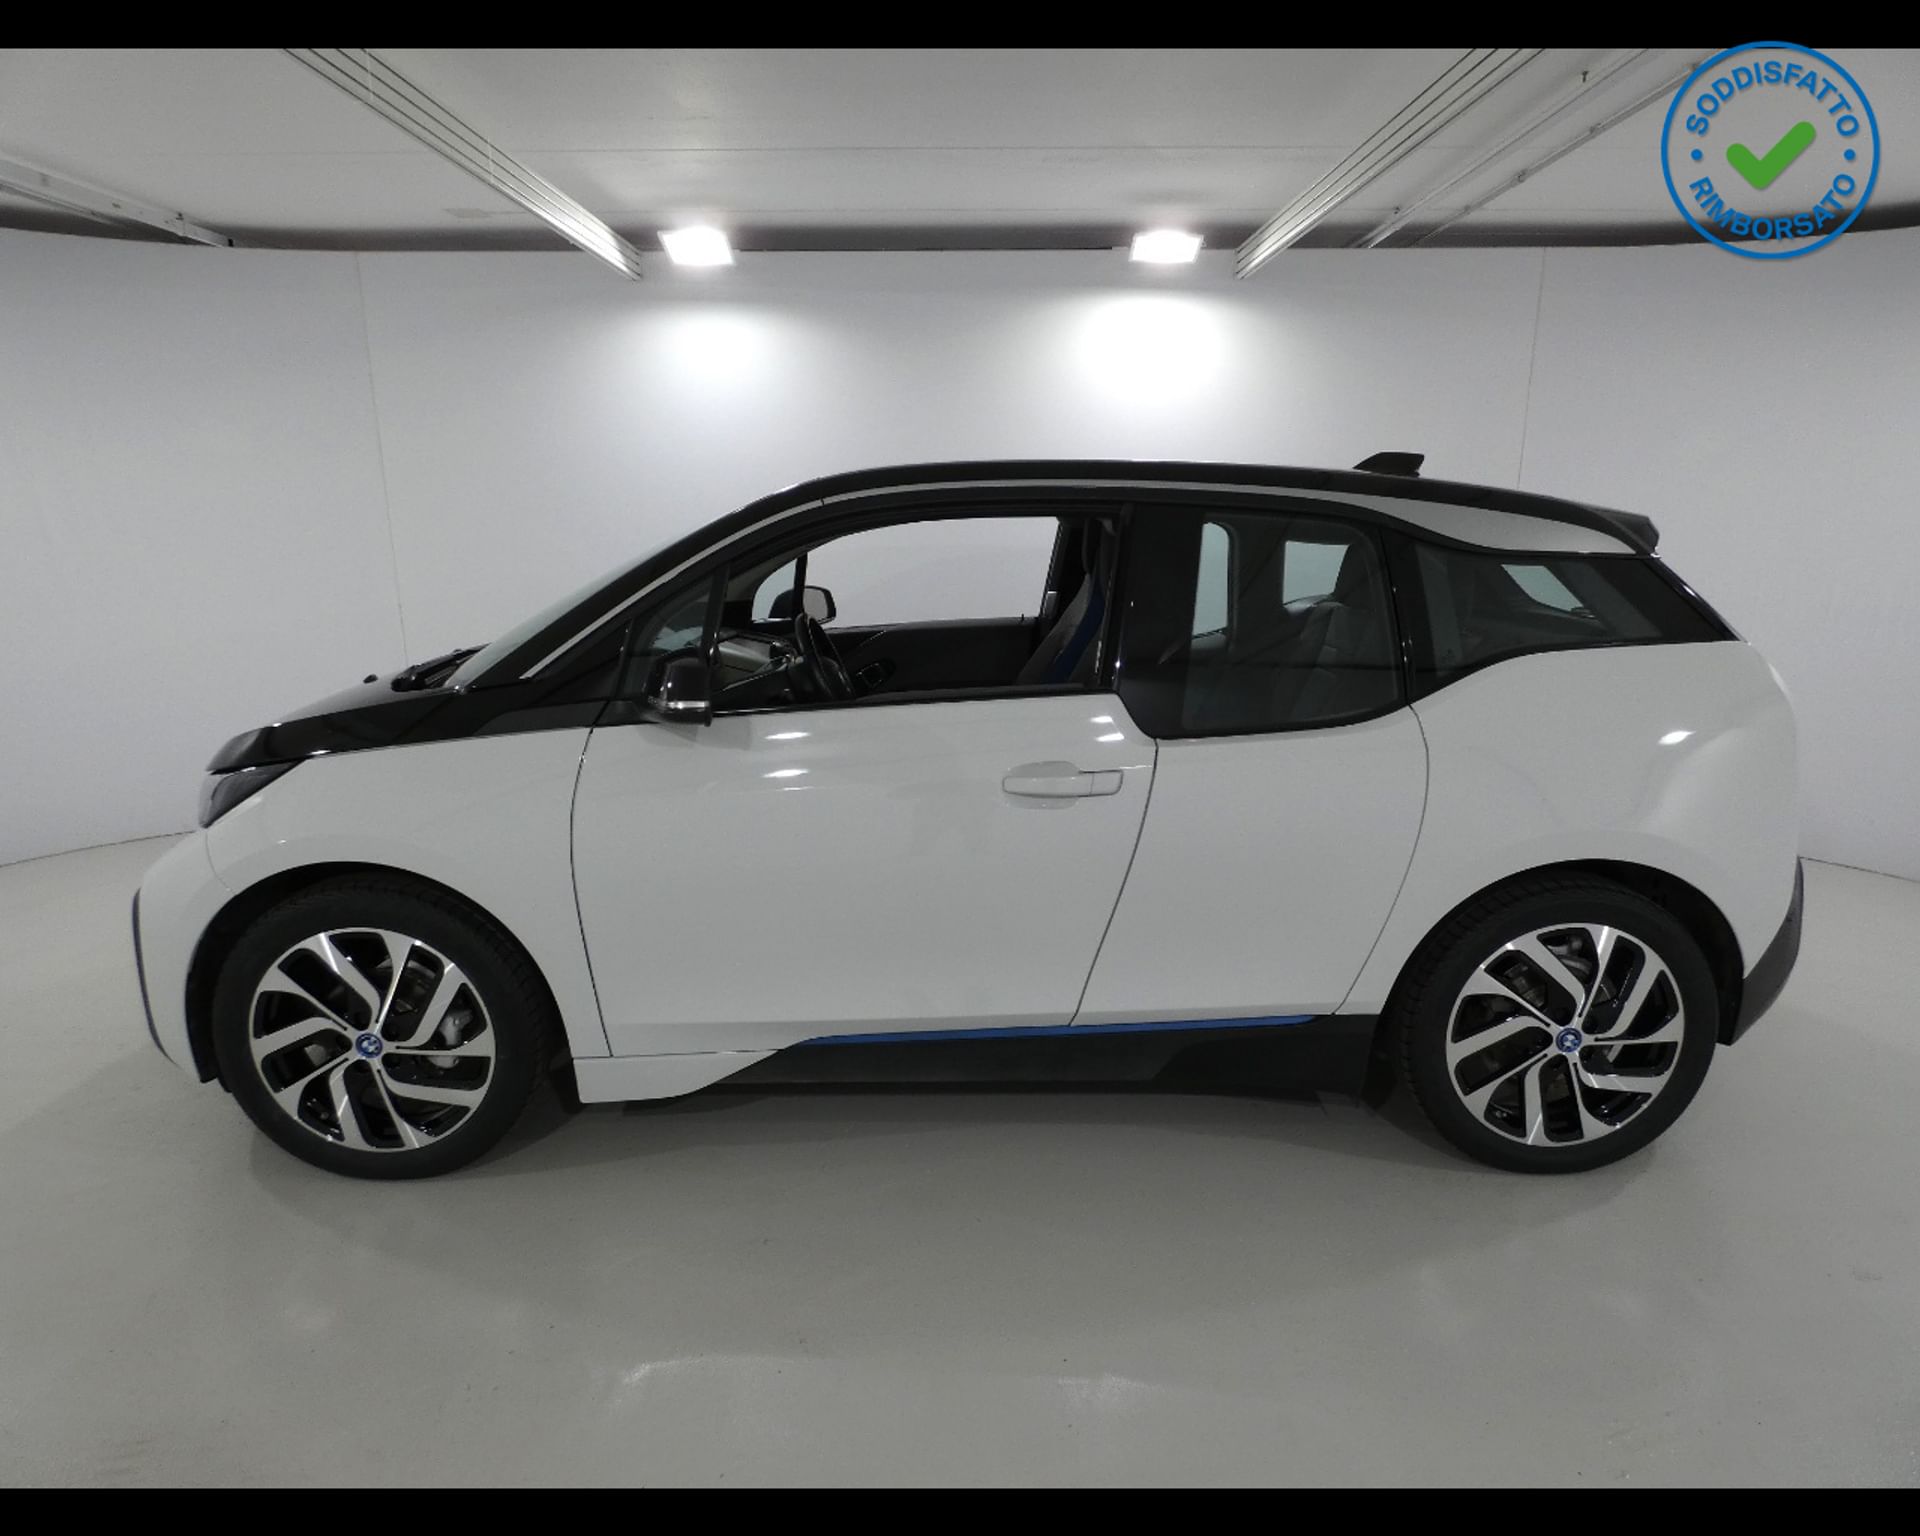 BMW i3 - Laterale sinistro